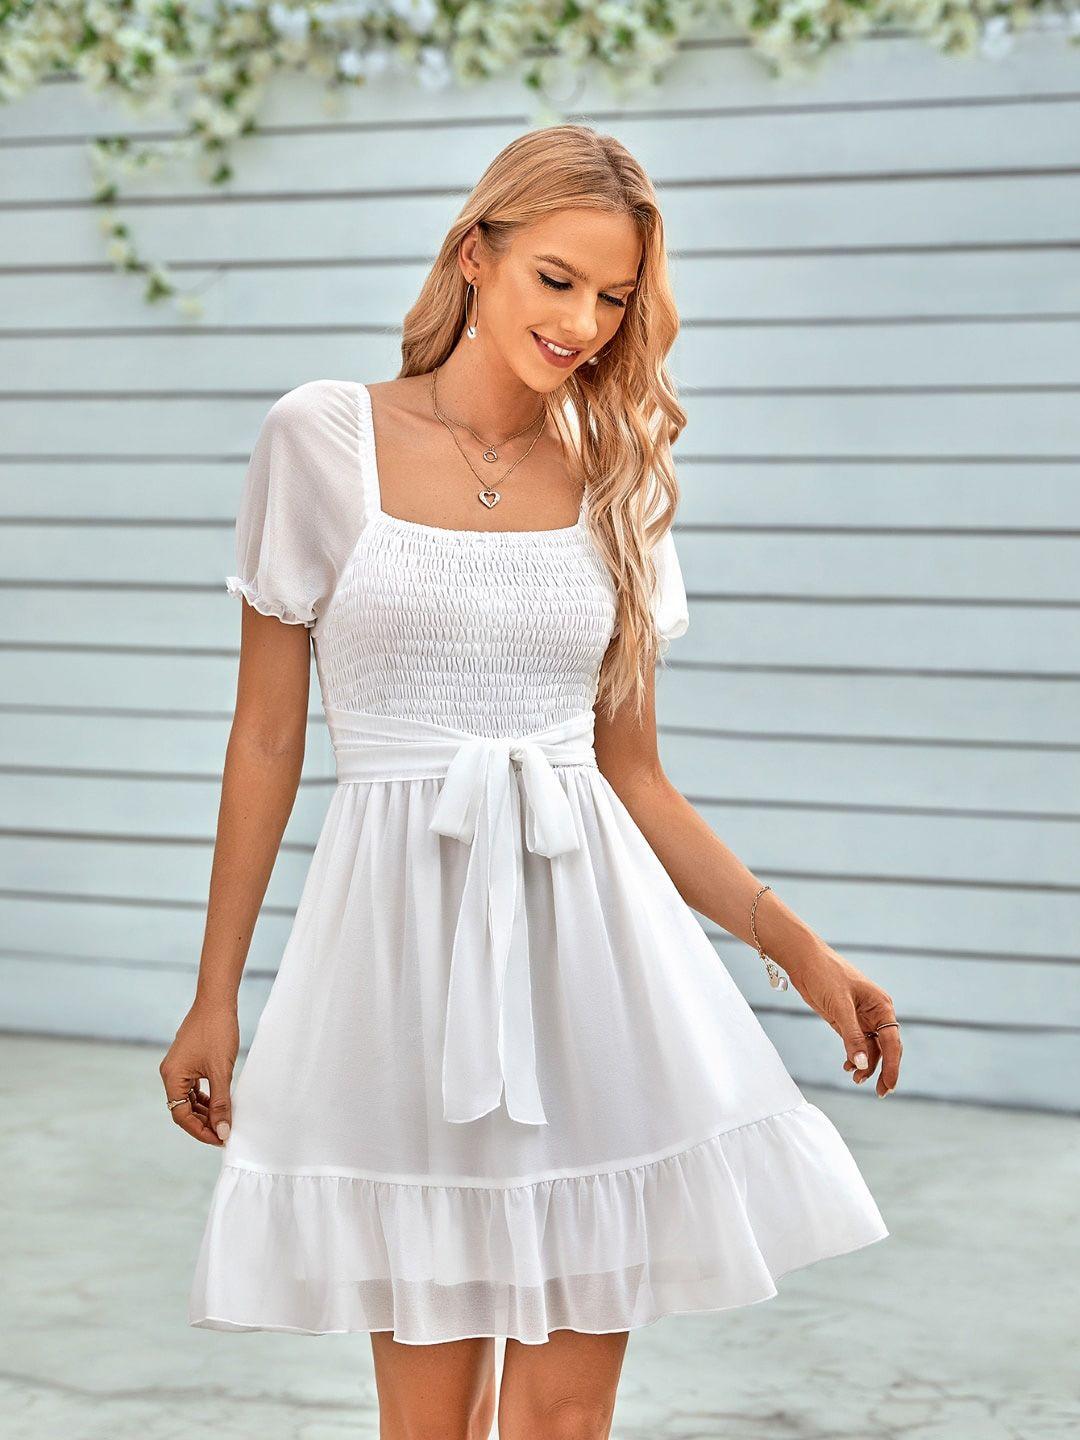 stylecast white extended sleeves smocked fit & flare dress